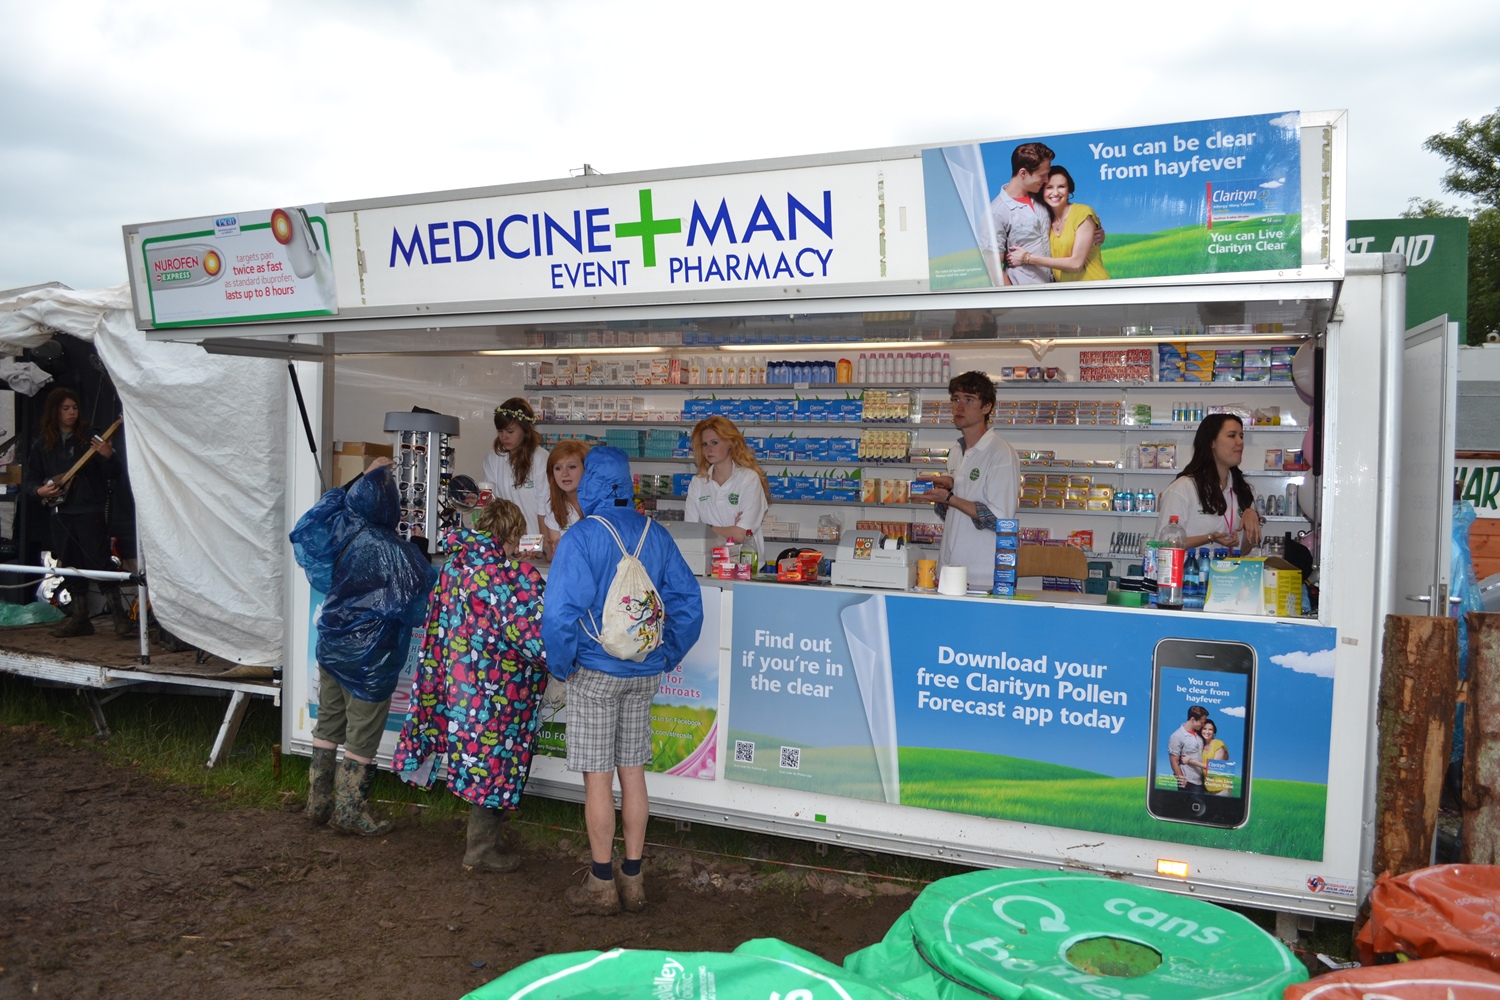 Rain or shine, the pharmacy remains open ready to aid customers.